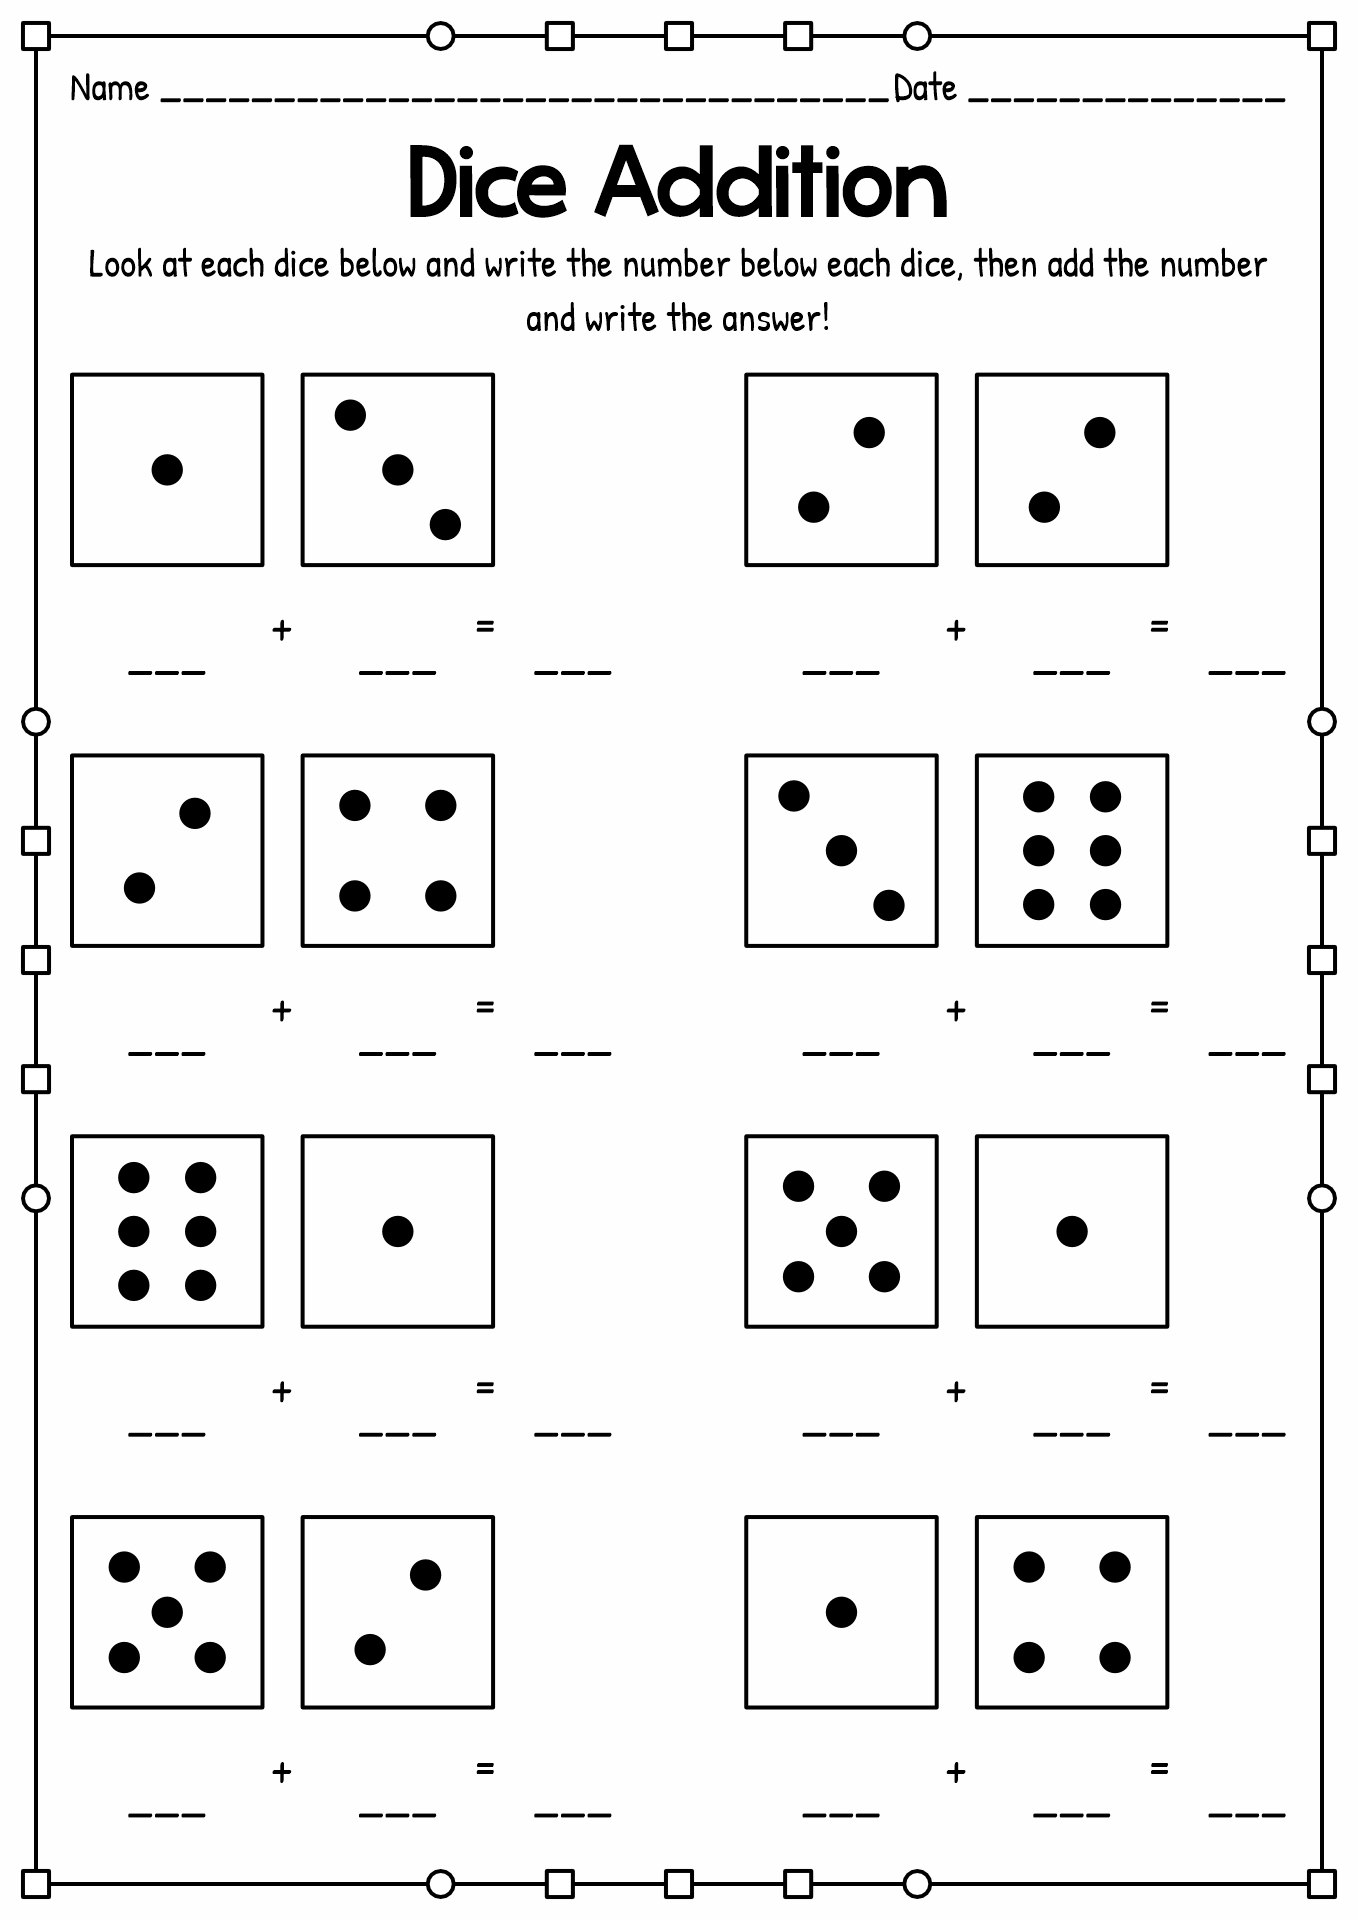 12 Best Images Of Dice Math Worksheets Dice Addition Worksheets Addition And Subtraction Dice